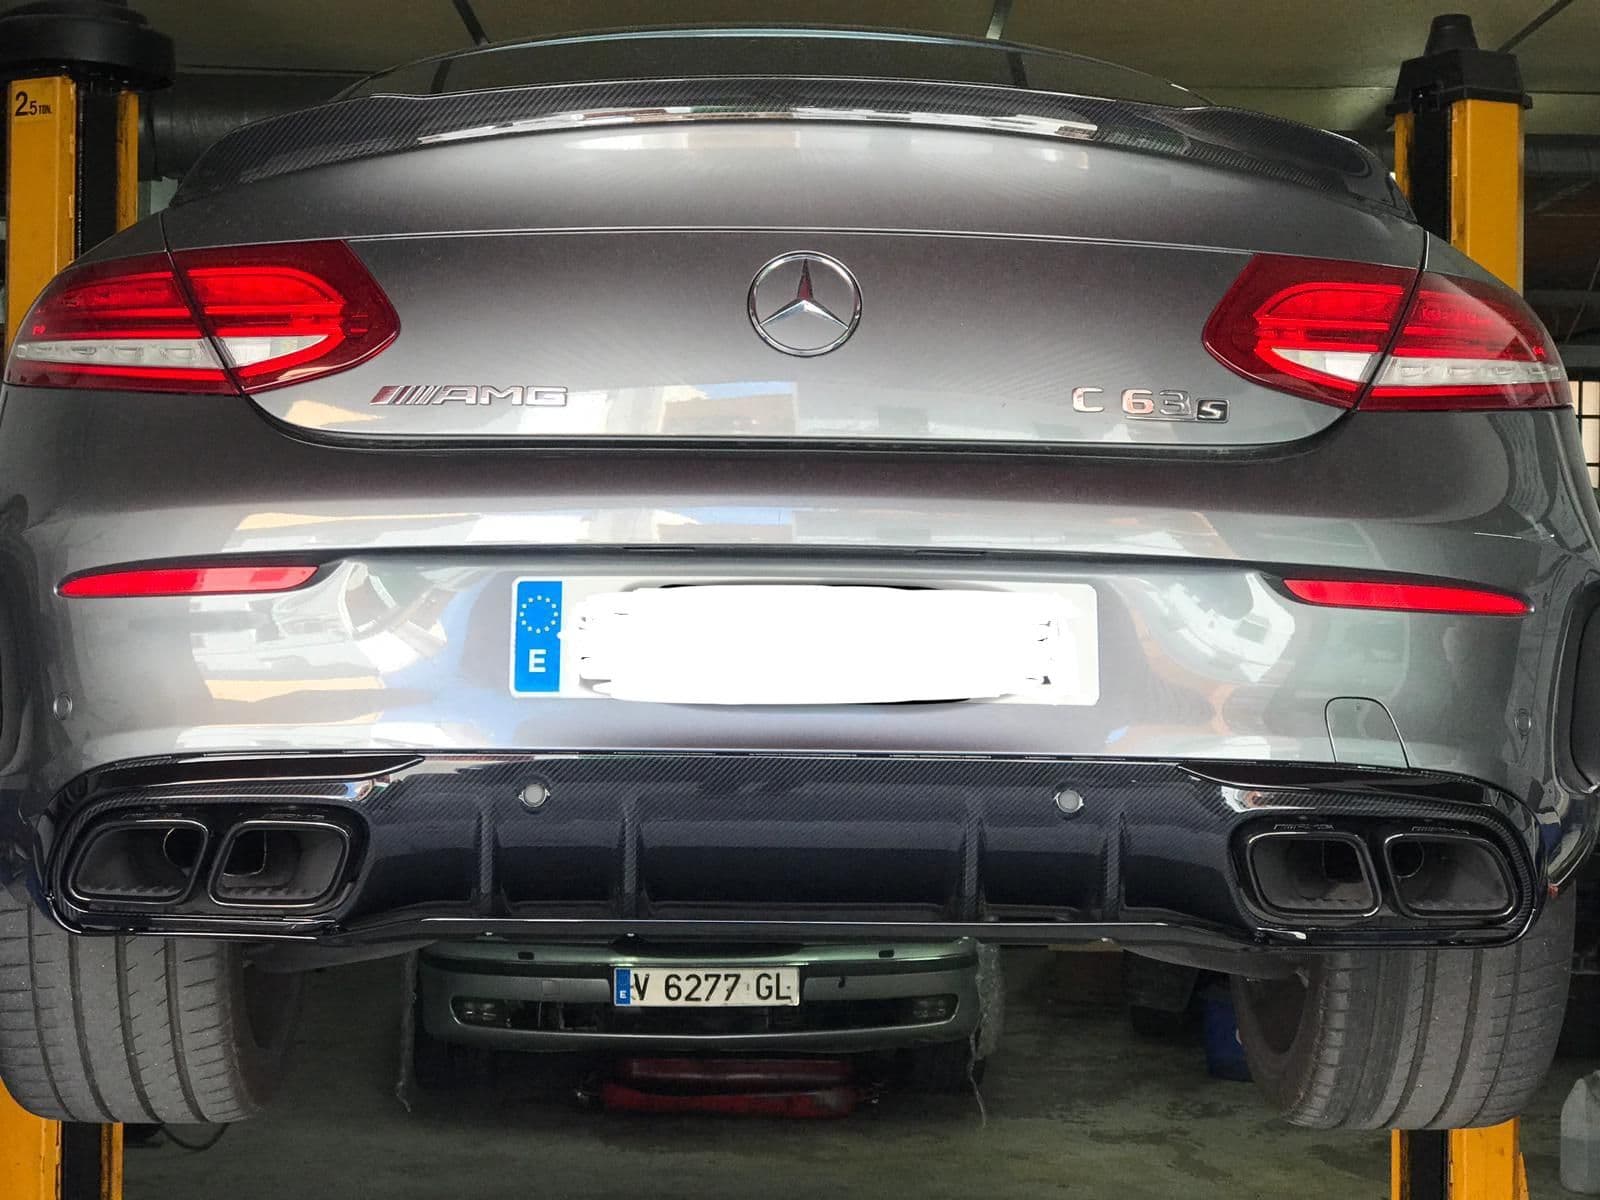 Rear diffuser for 2019 coupe - MBWorld.org Forums